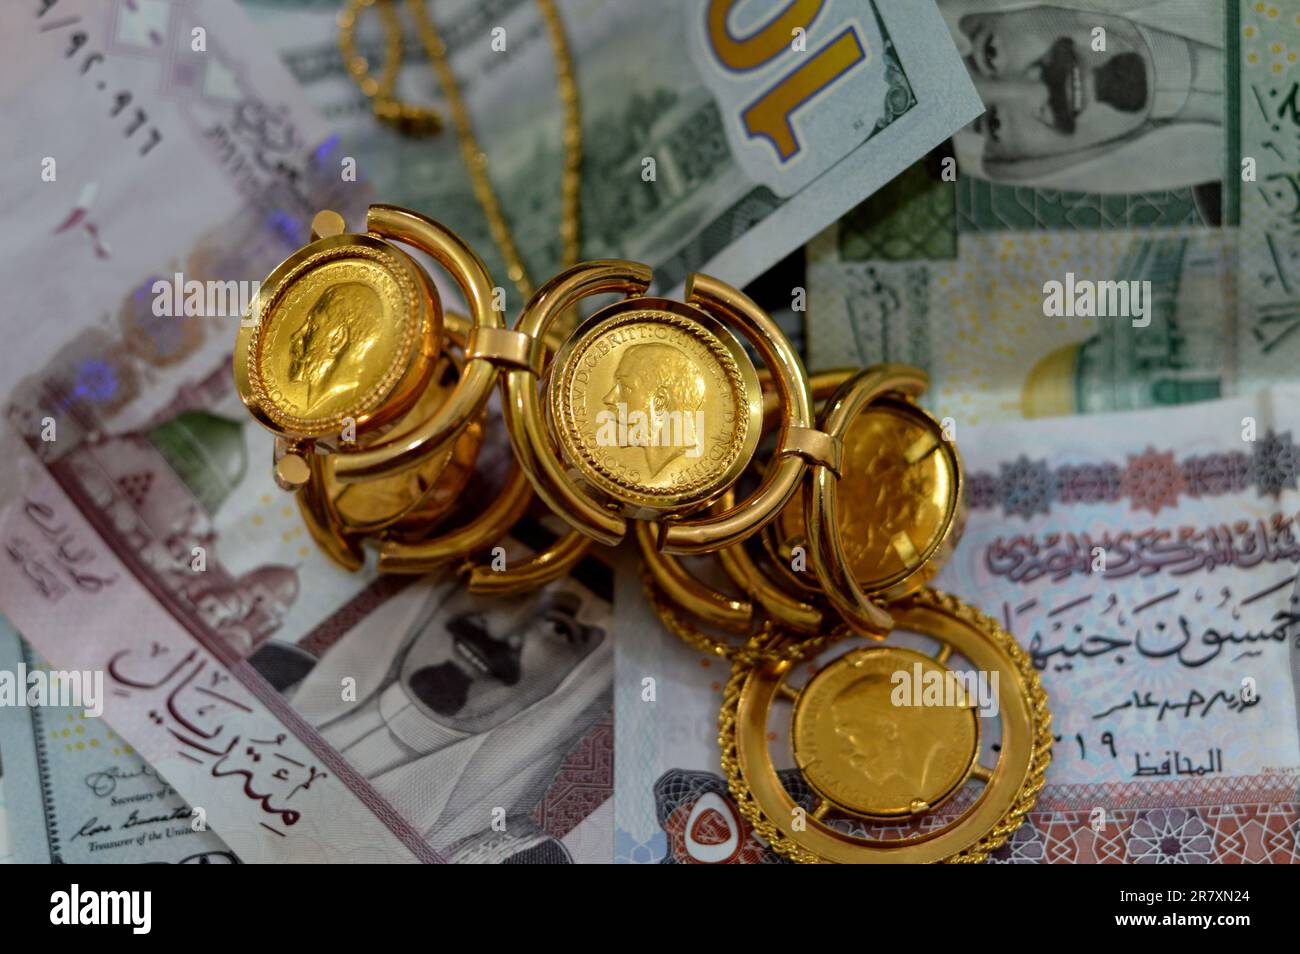 American dollars, Egyptian pounds and Saudi Arabia Riyals banknotes currency bills money with sovereign British gold coins shapes bullion coin feature Stock Photo